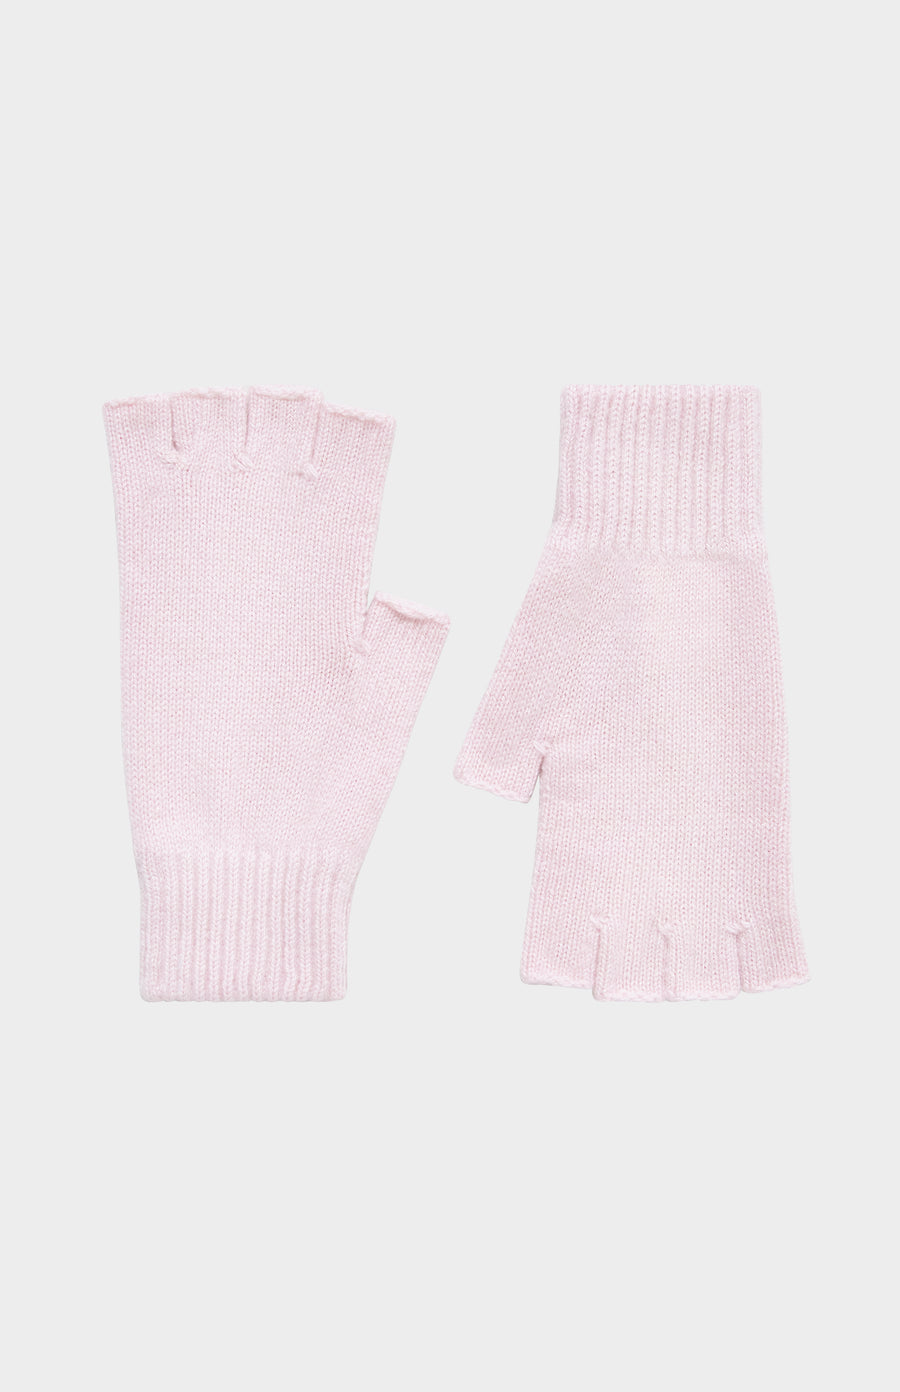 Pringle of Scotland Cosy Cashmere Fingerless Glove In Powder Pink